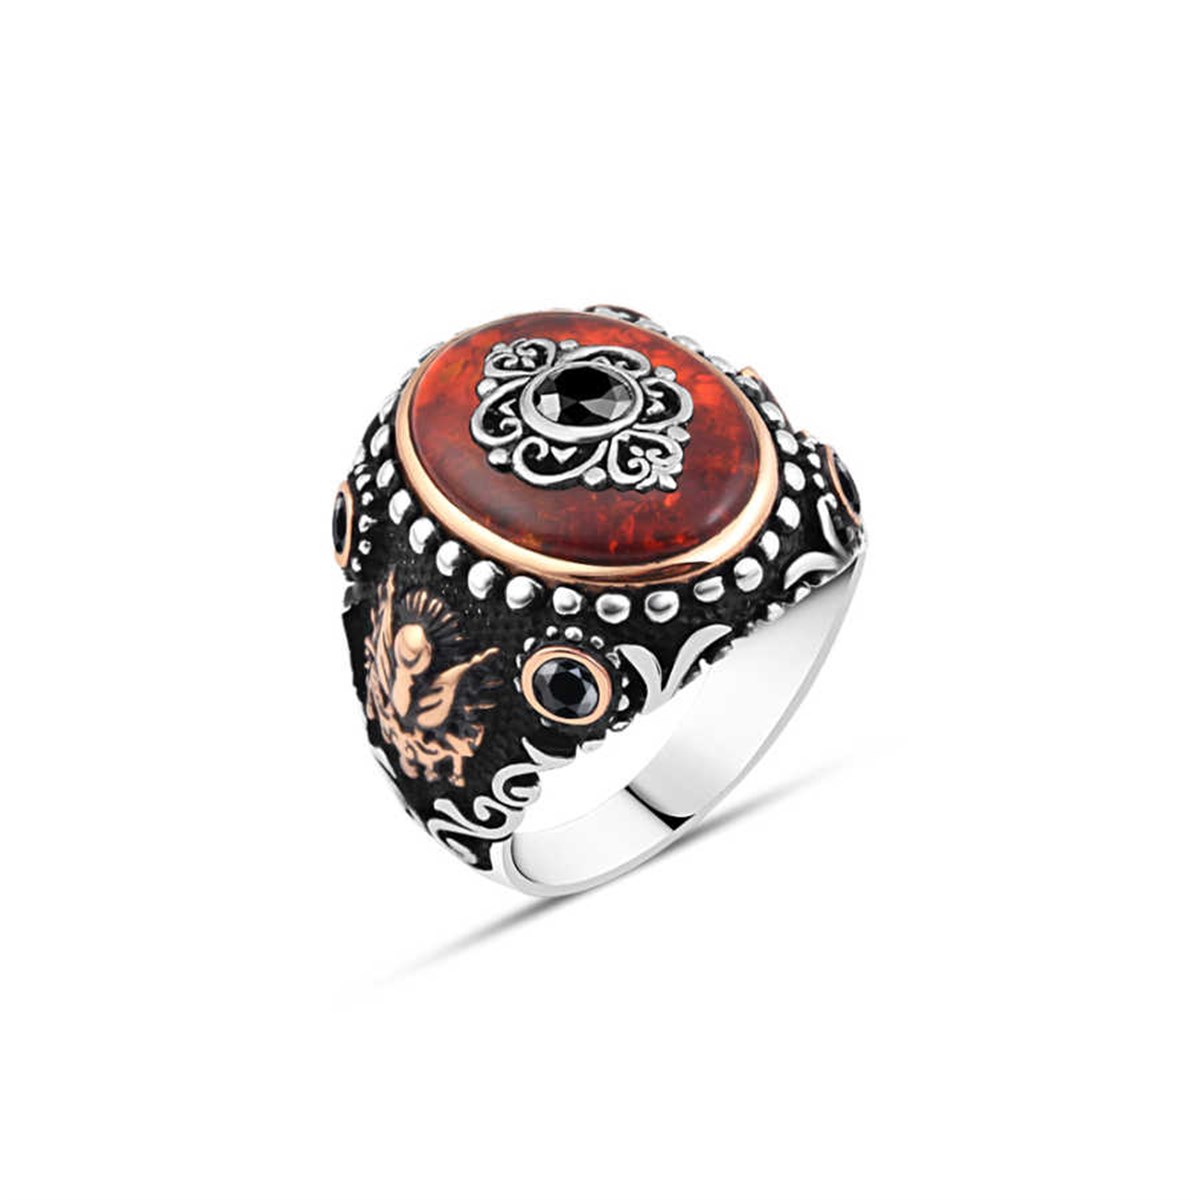 Synthetic Amber Middle Zircon Stone Motif Sterling Silver Men's Ring